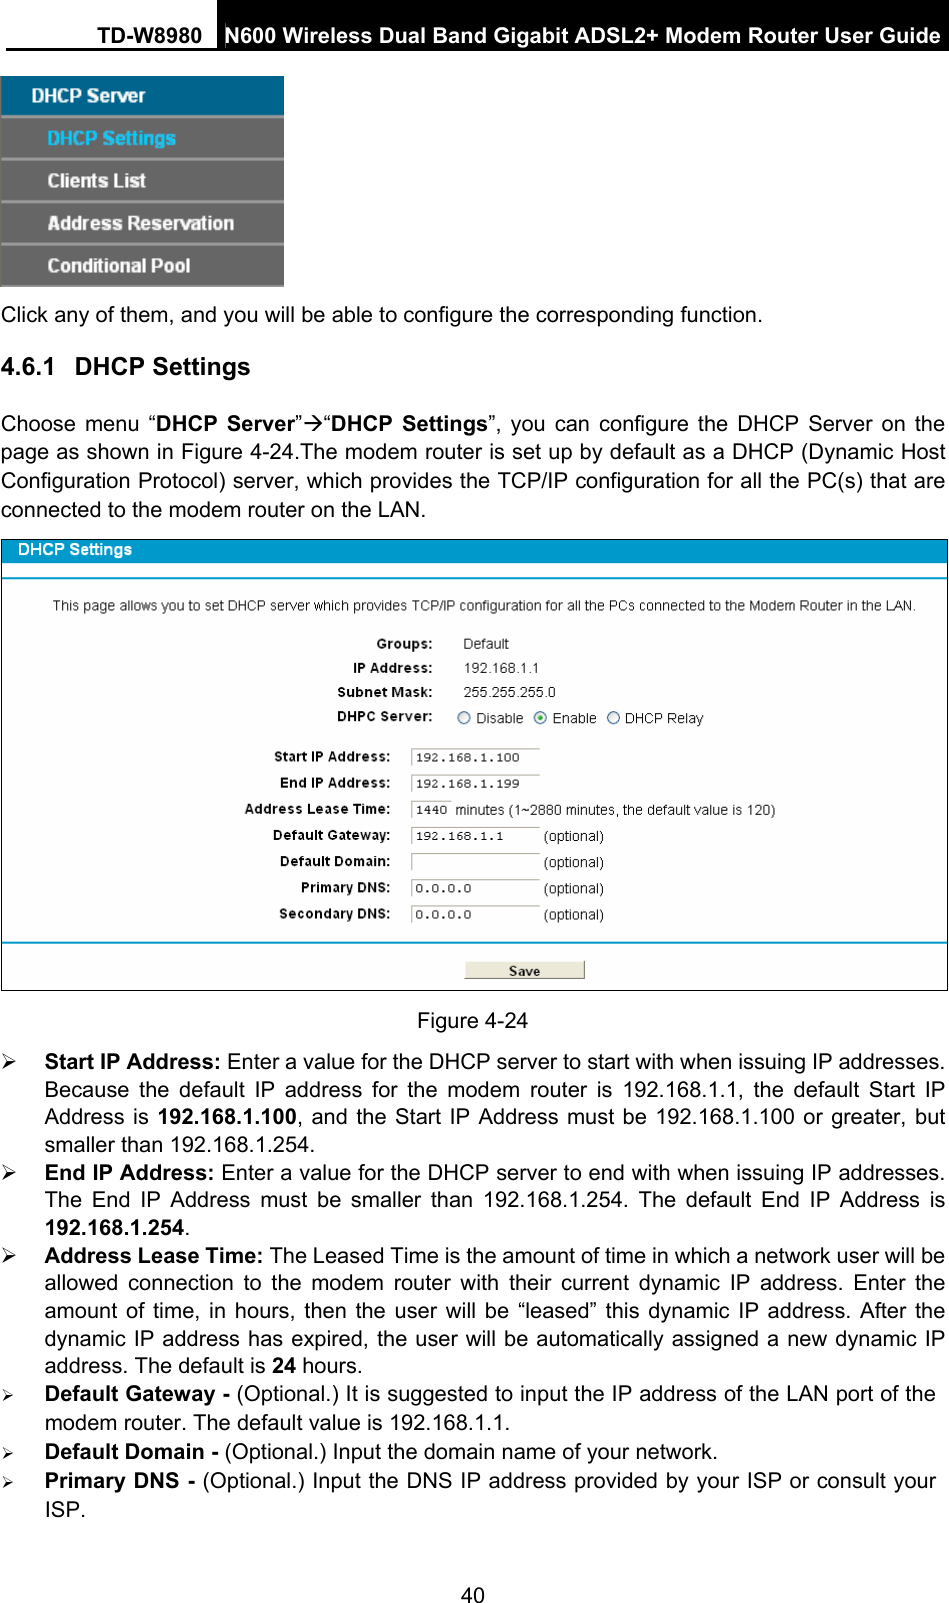 TD-W8980  N600 Wireless Dual Band Gigabit ADSL2+ Modem Router User Guide 40  Click any of them, and you will be able to configure the corresponding function. 4.6.1  DHCP Settings Choose menu “DHCP Server”Æ“DHCP Settings”, you can configure the DHCP Server on the page as shown in Figure 4-24.The modem router is set up by default as a DHCP (Dynamic Host Configuration Protocol) server, which provides the TCP/IP configuration for all the PC(s) that are connected to the modem router on the LAN.  Figure 4-24 ¾ Start IP Address: Enter a value for the DHCP server to start with when issuing IP addresses. Because the default IP address for the modem router is 192.168.1.1, the default Start IP Address is 192.168.1.100, and the Start IP Address must be 192.168.1.100 or greater, but smaller than 192.168.1.254. ¾ End IP Address: Enter a value for the DHCP server to end with when issuing IP addresses. The End IP Address must be smaller than 192.168.1.254. The default End IP Address is 192.168.1.254. ¾ Address Lease Time: The Leased Time is the amount of time in which a network user will be allowed connection to the modem router with their current dynamic IP address. Enter the amount of time, in hours, then the user will be “leased” this dynamic IP address. After the dynamic IP address has expired, the user will be automatically assigned a new dynamic IP address. The default is 24 hours. ¾ Default Gateway - (Optional.) It is suggested to input the IP address of the LAN port of the modem router. The default value is 192.168.1.1. ¾ Default Domain - (Optional.) Input the domain name of your network. ¾ Primary DNS - (Optional.) Input the DNS IP address provided by your ISP or consult your ISP. 